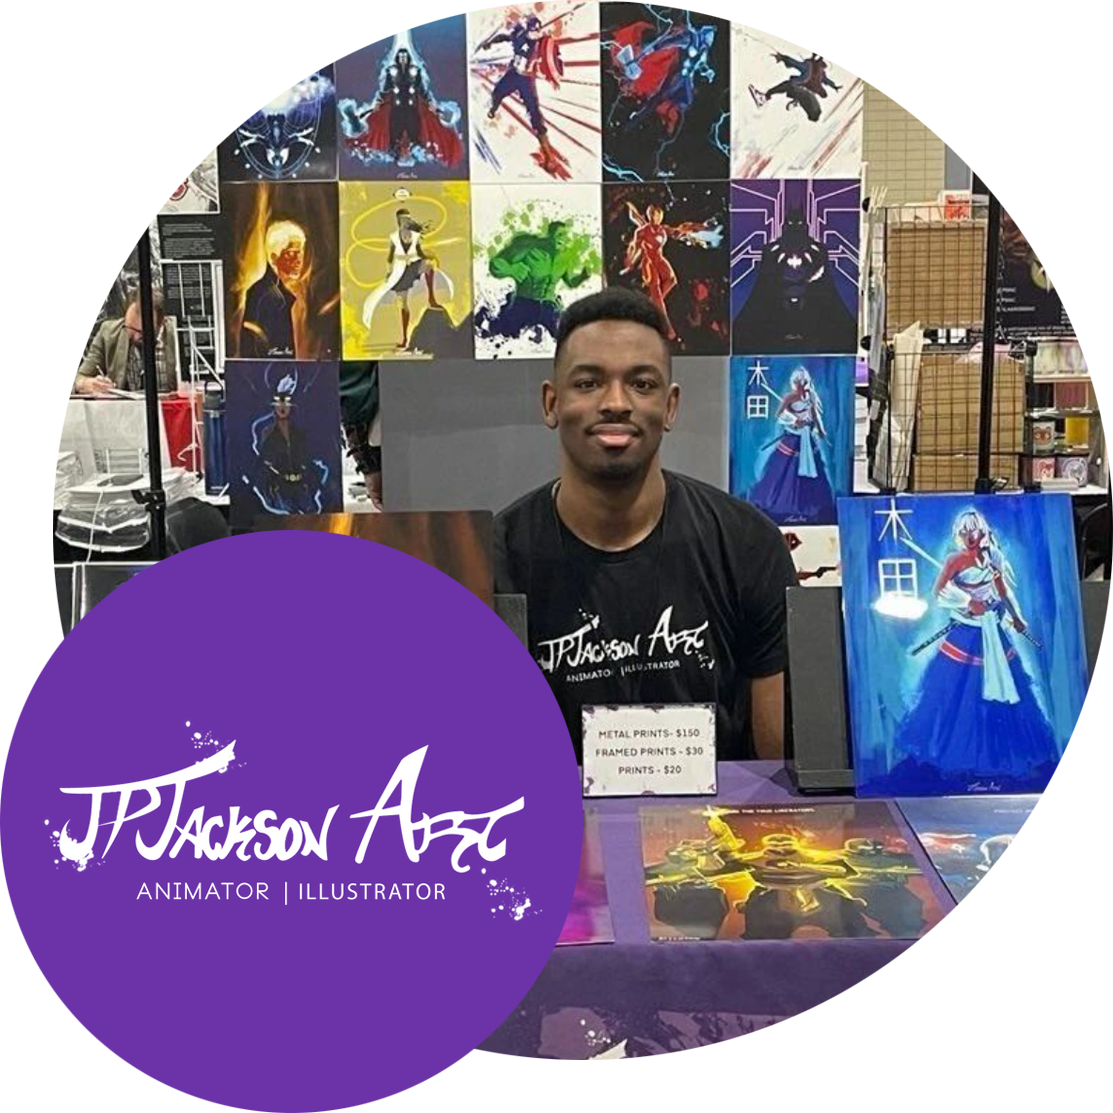 Logo & promotional image from J.P. Jackson Art, animation & illustration. The photo shows J.P. seated at a booth at a convention, surrounded by prints & graphic novels of his work. He's smiling & looking at the camera, wearing a black shirt with his logo on it, and is holding up some of his artwork to show the viewer.